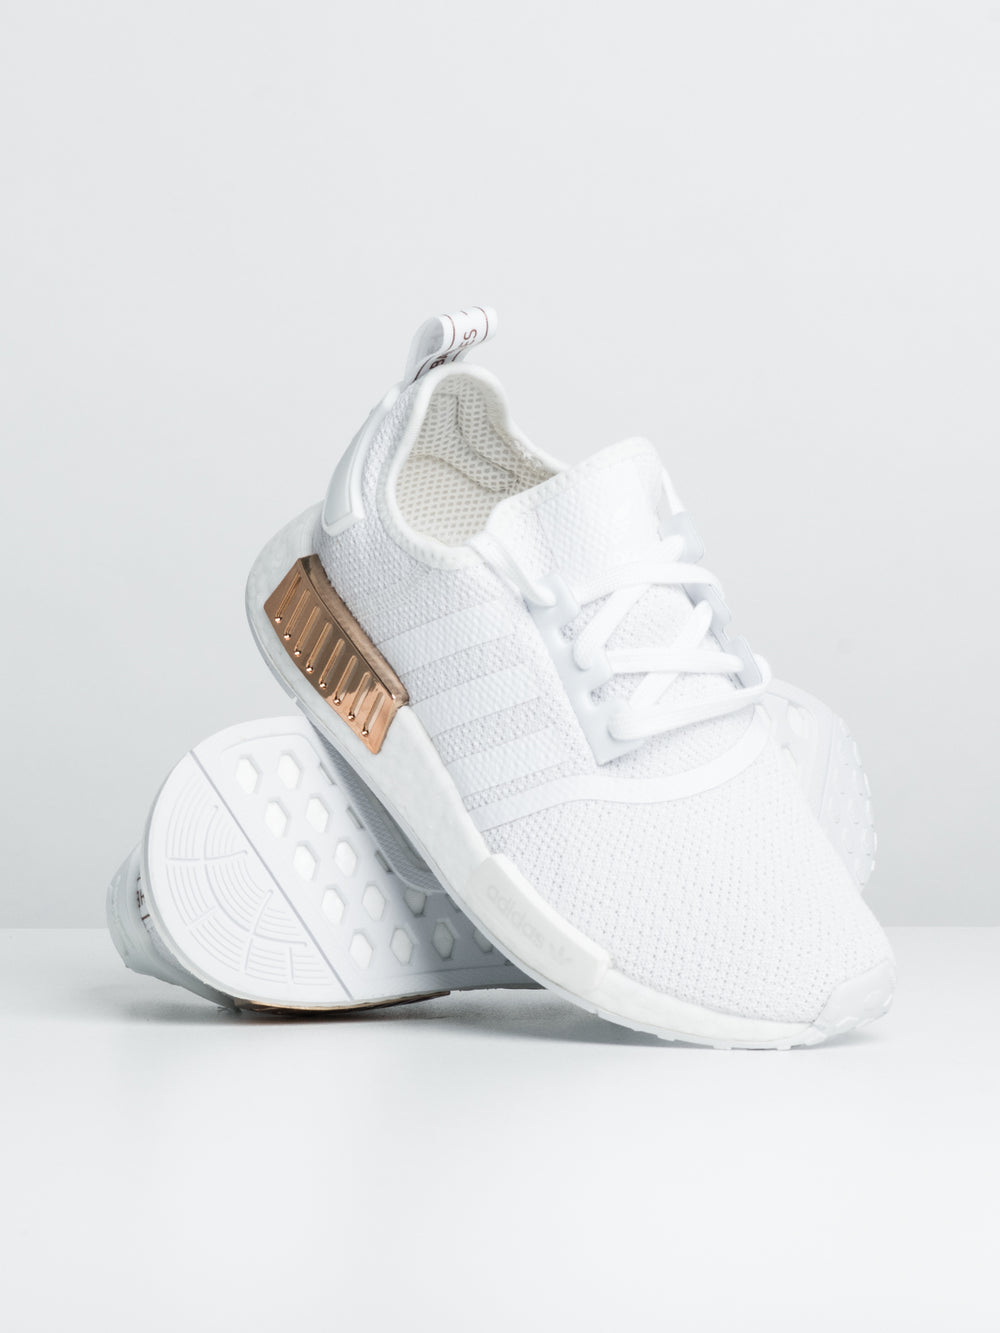 WOMENS ADIDAS NMD_R1 SNEAKERS- WHITE - CLEARANCE